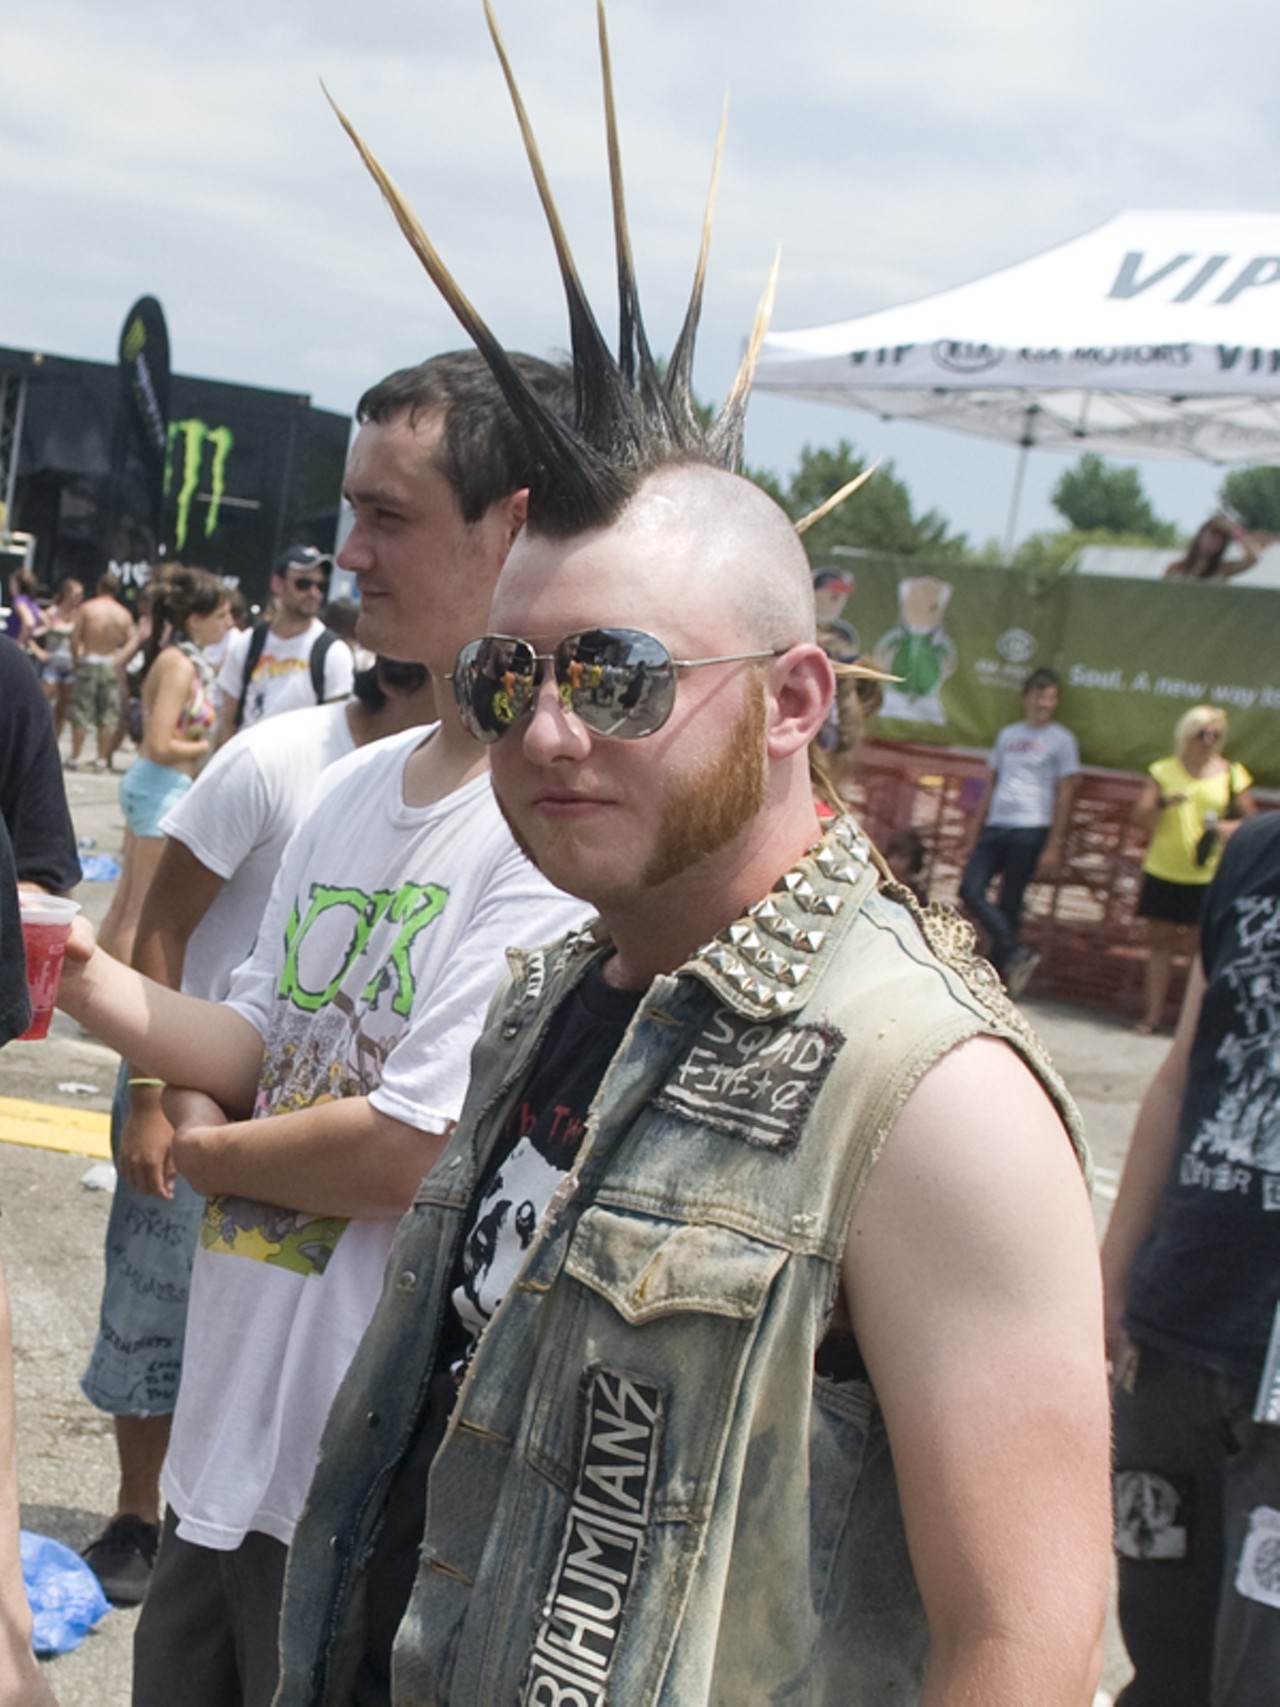 Another epic mohawk.